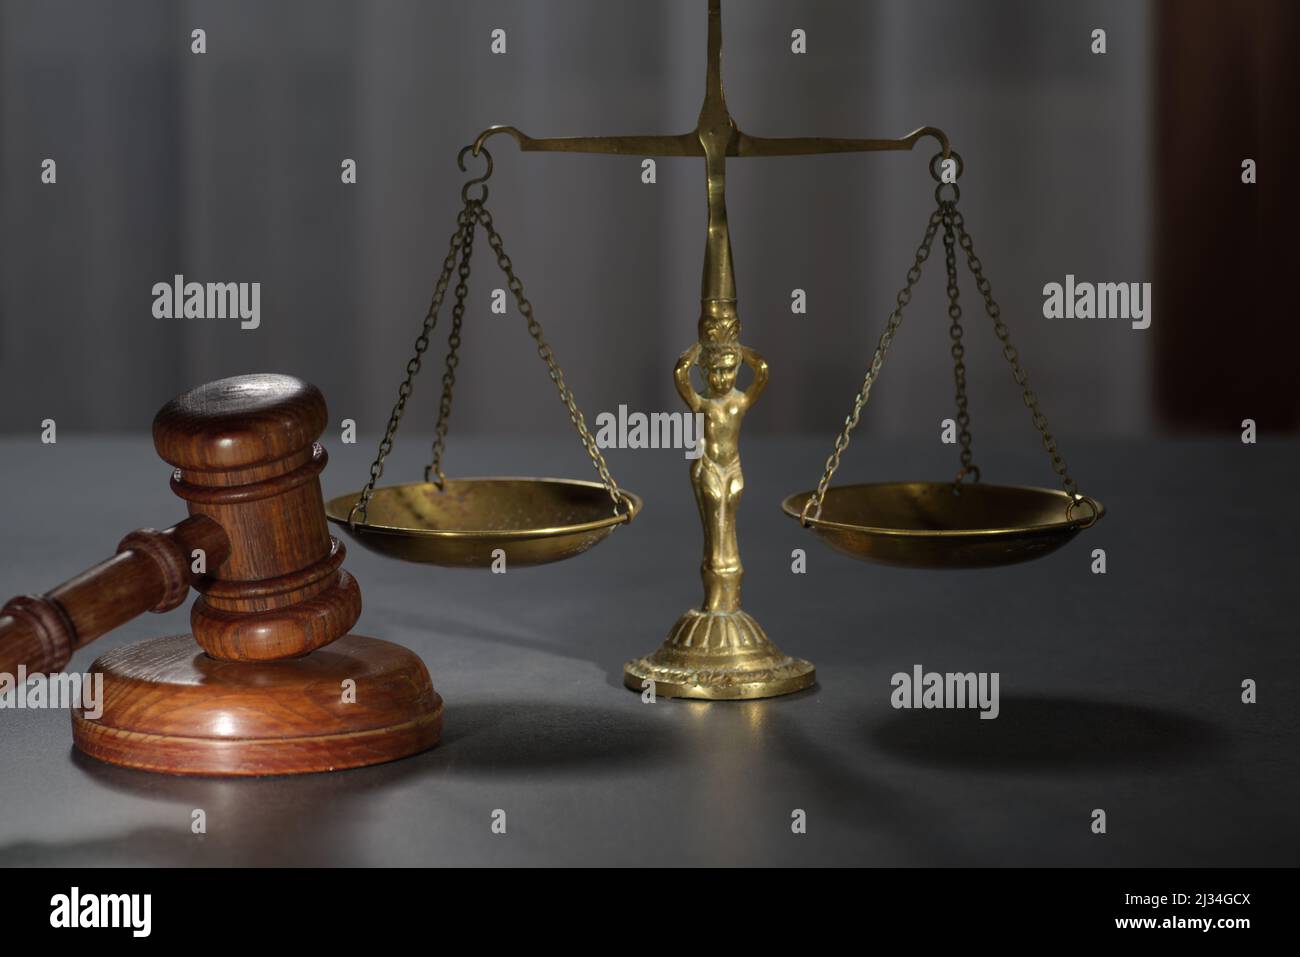 Wooden judges gavel and symbol of law and justice on table in a courtroom or law enforcement office on dark background Stock Photo